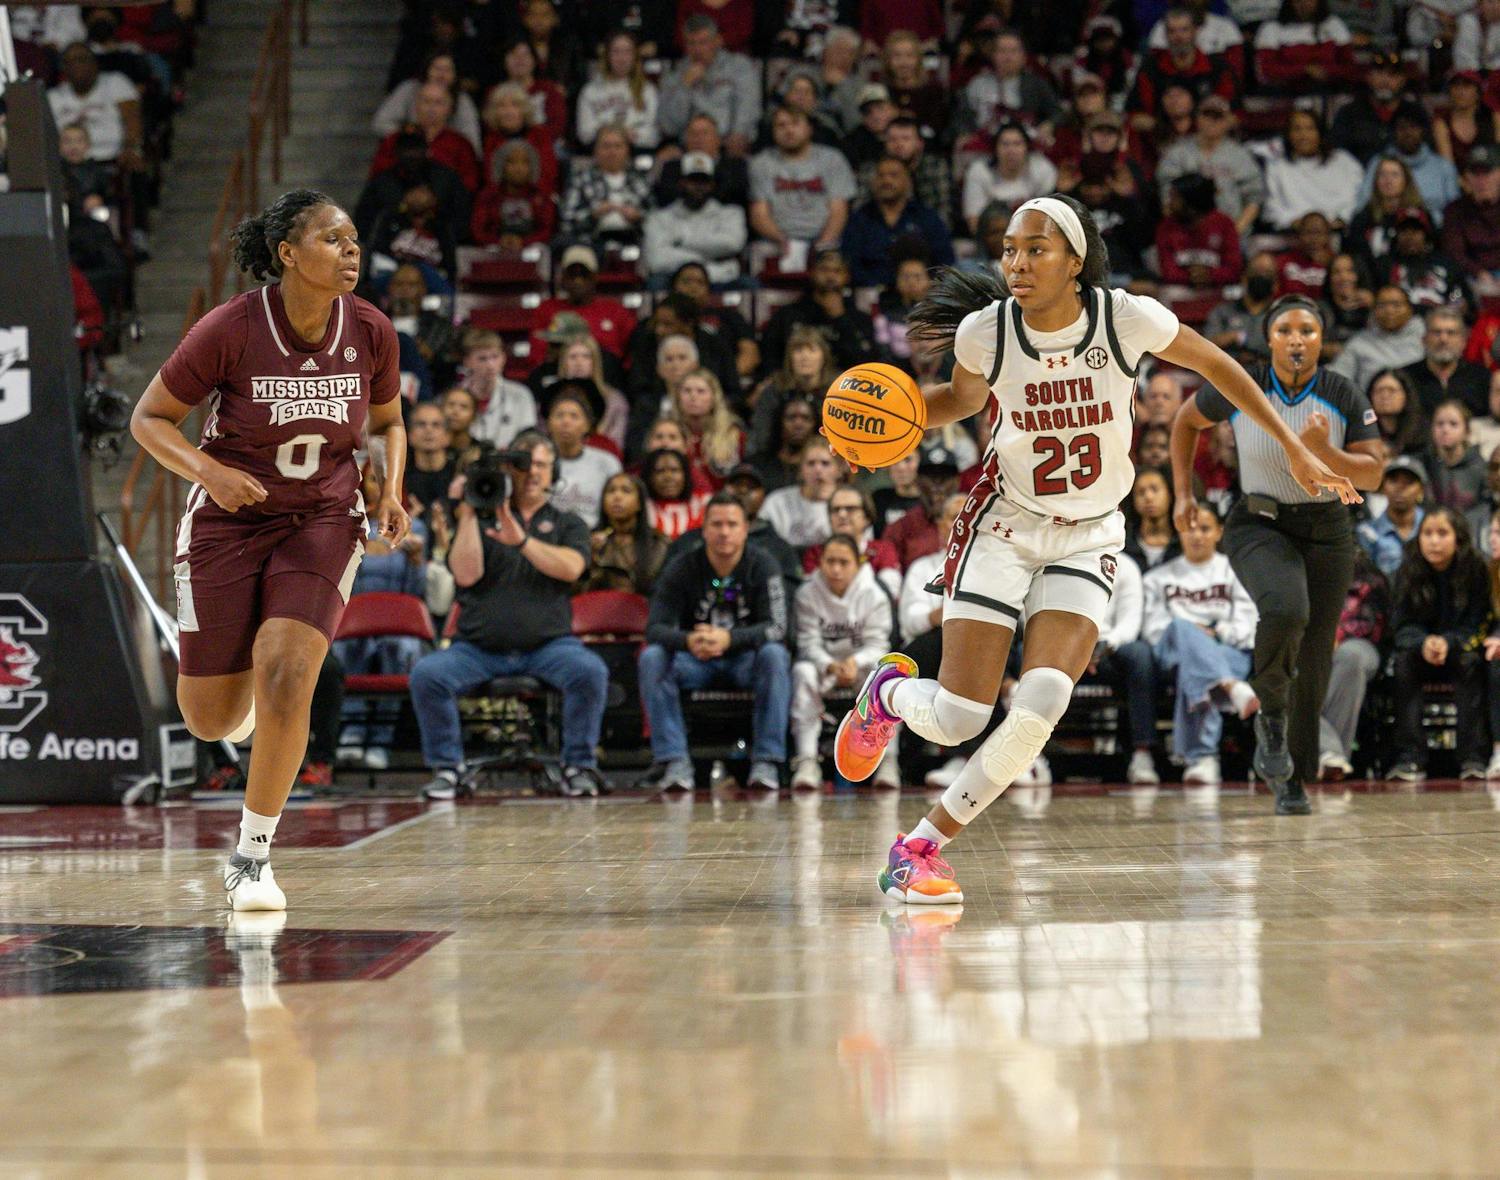 Junior Guard Bree Hall drives the ball through the court against Mississippi's defense in its SEC home opener on Jan. 7, 2024. Hall led the Gamecocks with 15 points in the 85-66 victory over Mississippi State.